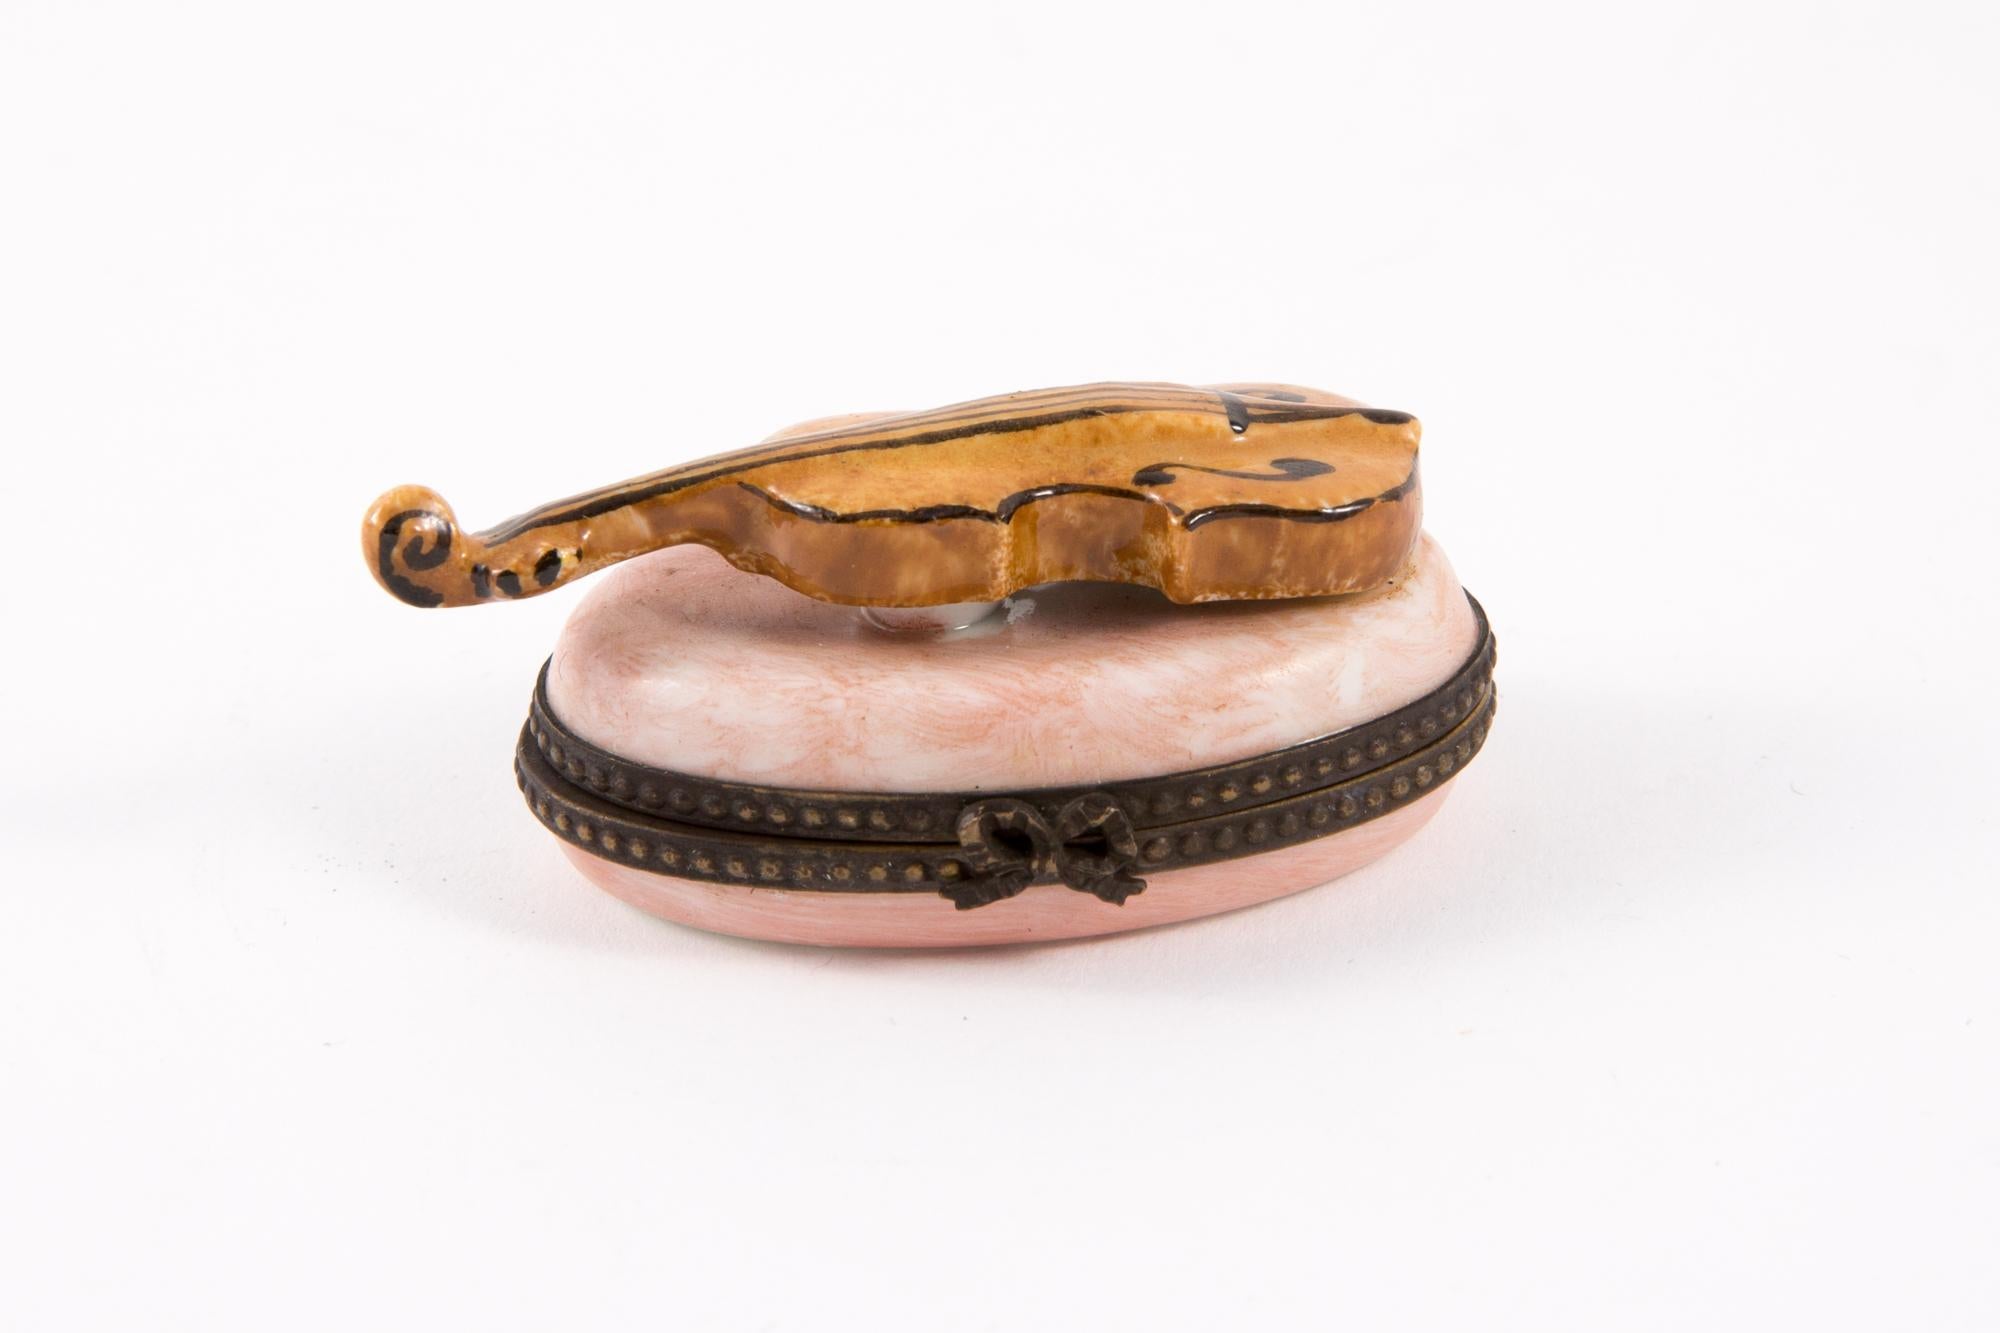 Limoges Porcelain violin pill or jewel box featuring a metal frame, a bow claps, leaves painted inside and a top violin on the pink box.
Hand Painted
In good vintage condition. 
Width: 1.7in. (4.5cm)
Length: 2.3in. (6cm)
Heigth: 1.18in. (3cm) 
We